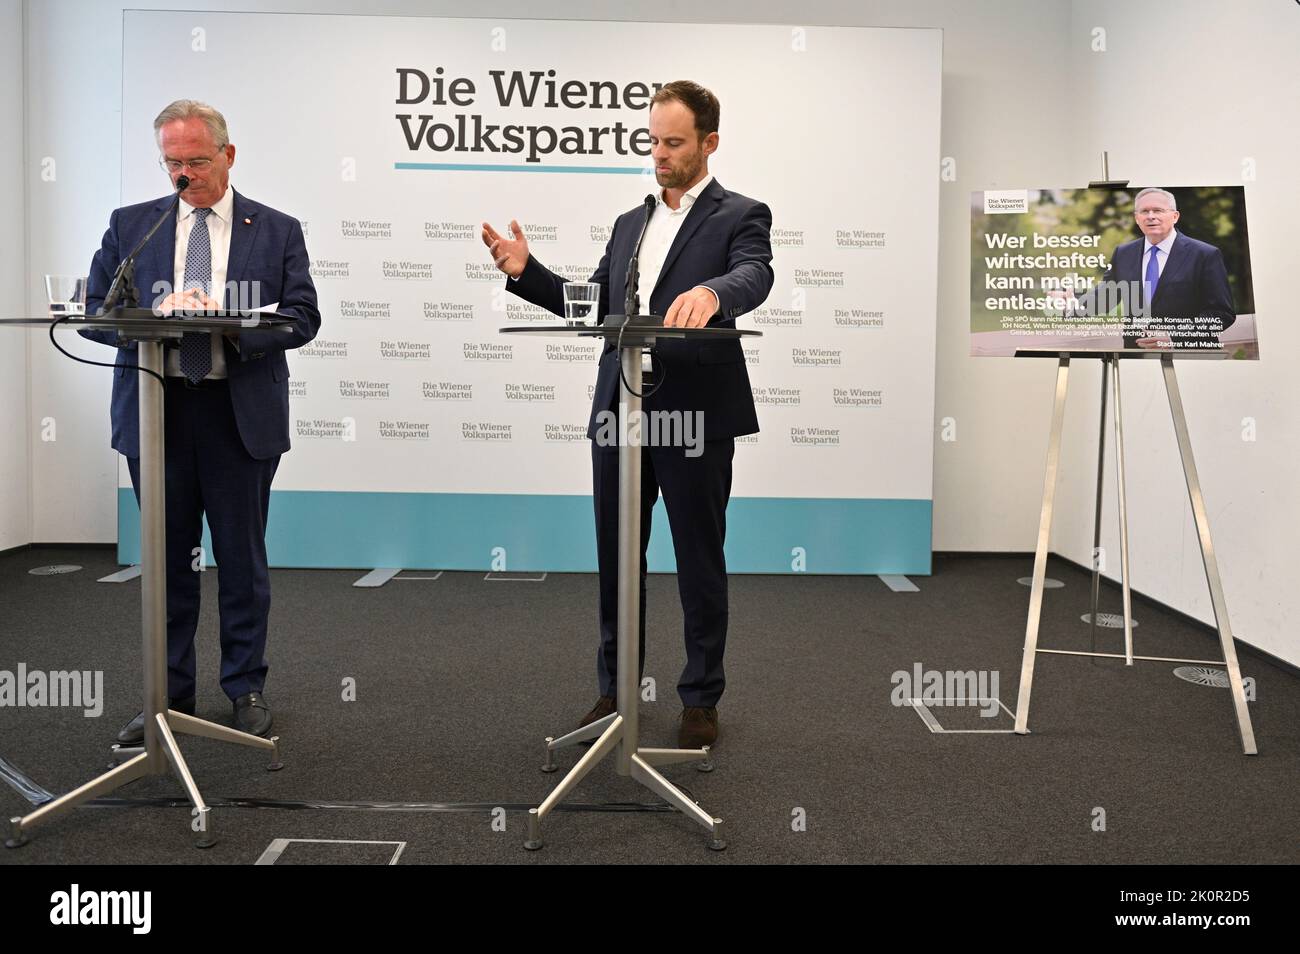 Vienna, Austria. 13th Sep, 2022. Press conference of the Vienna People's Party with club chairman Markus Wölbitsch (R) and Vienna People's Party with state party chairman Karl Mahrer (L). Topic: News about the SPÖ financial scandal and news from the Vienna People's Party. Credit: Franz Perc/Alamy Live News Stock Photo